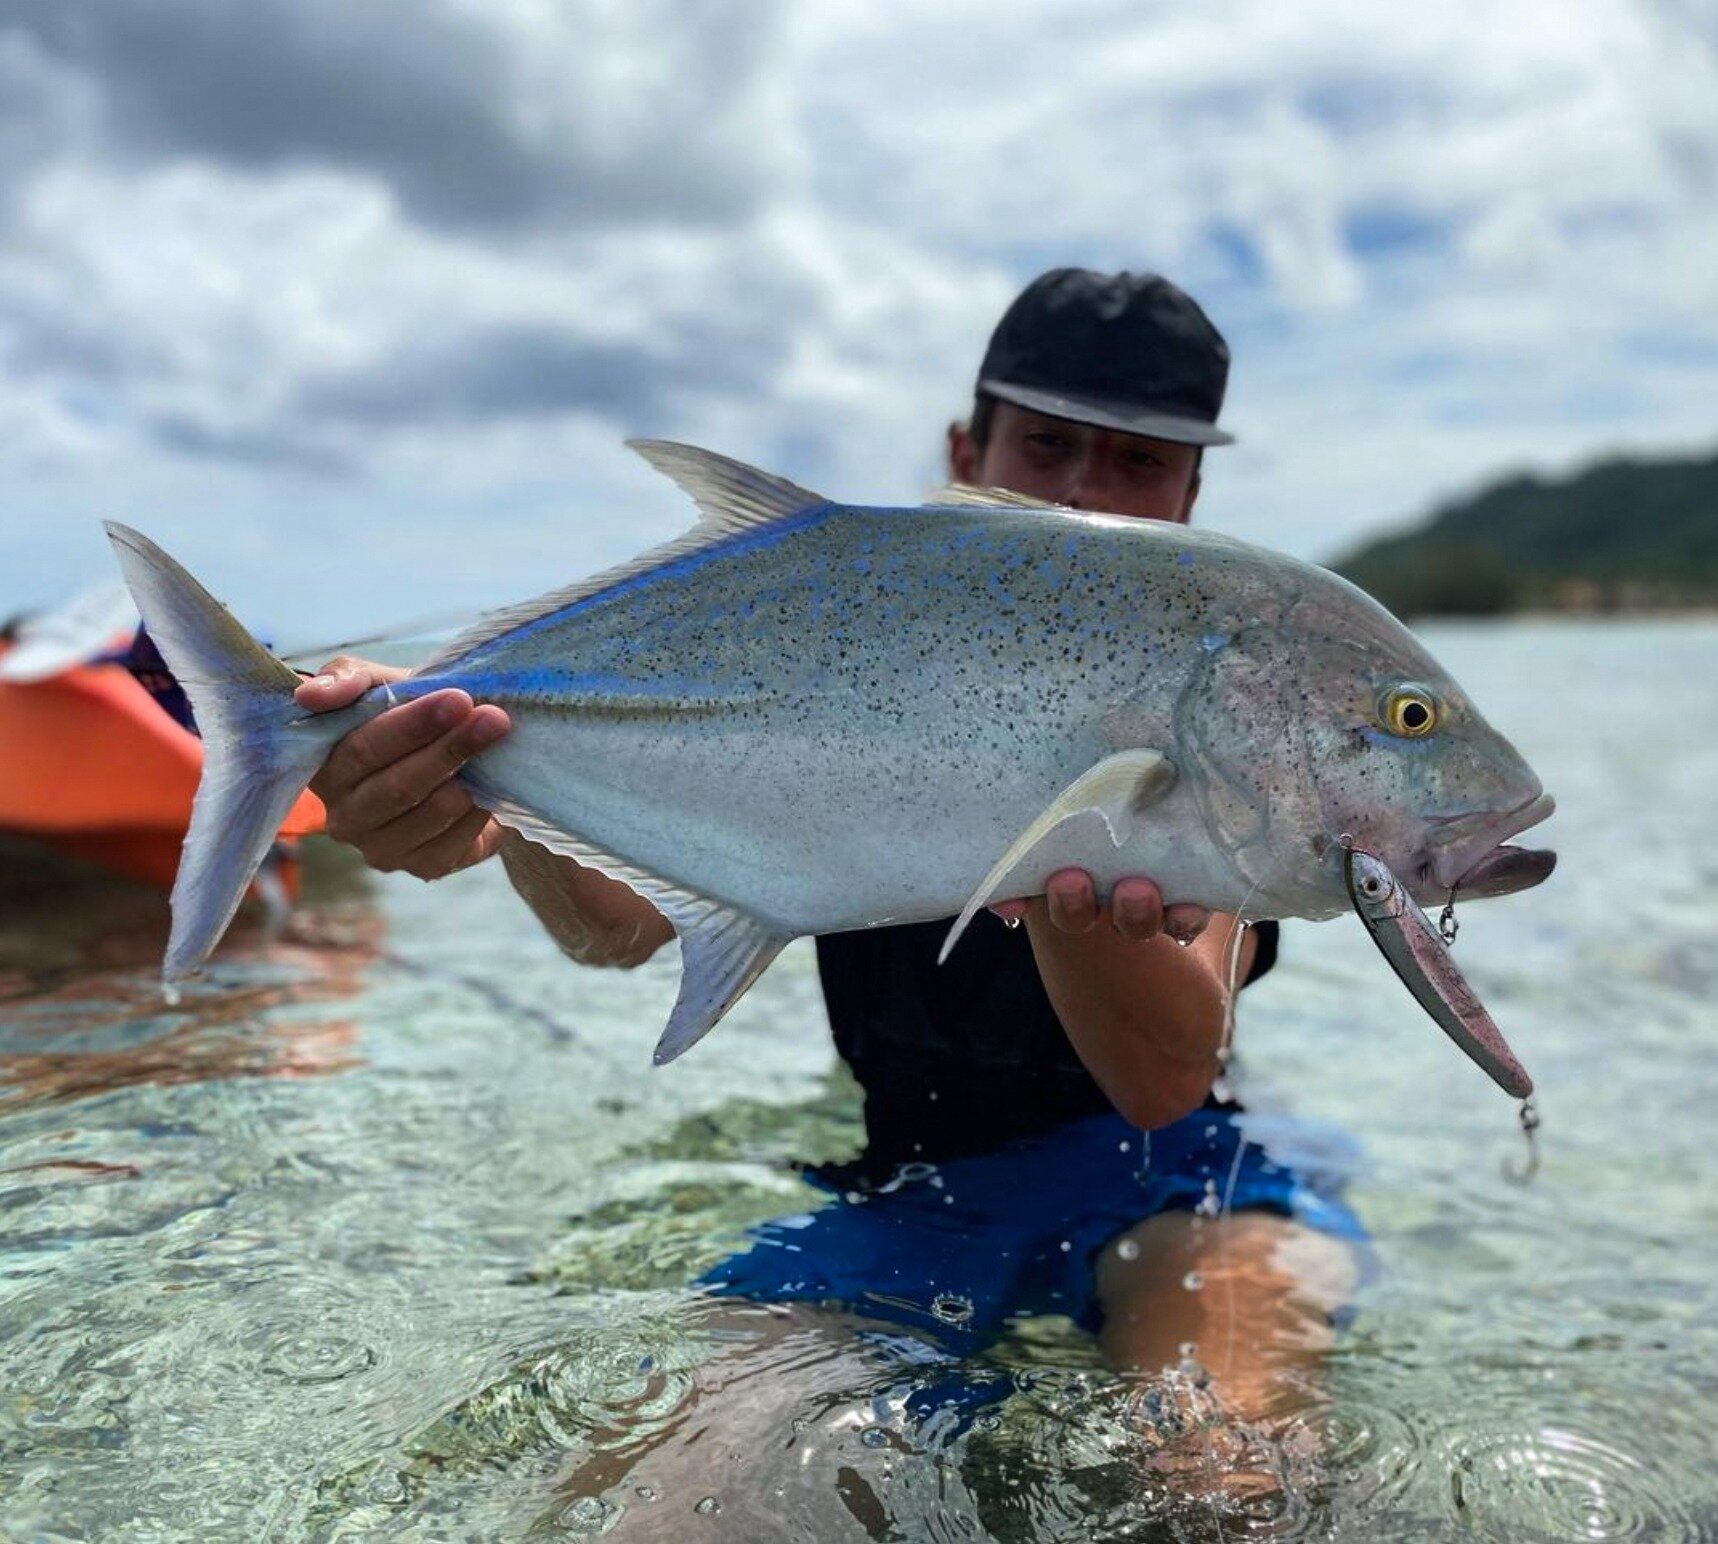 This Riptide 155mm has seen better days. But that doesn't stop the killer swimming action from attracting bites.

📷: @santi_escolme

#craftedbyexperience #topwaterfishing #gt #saltwatergame #sportfishing